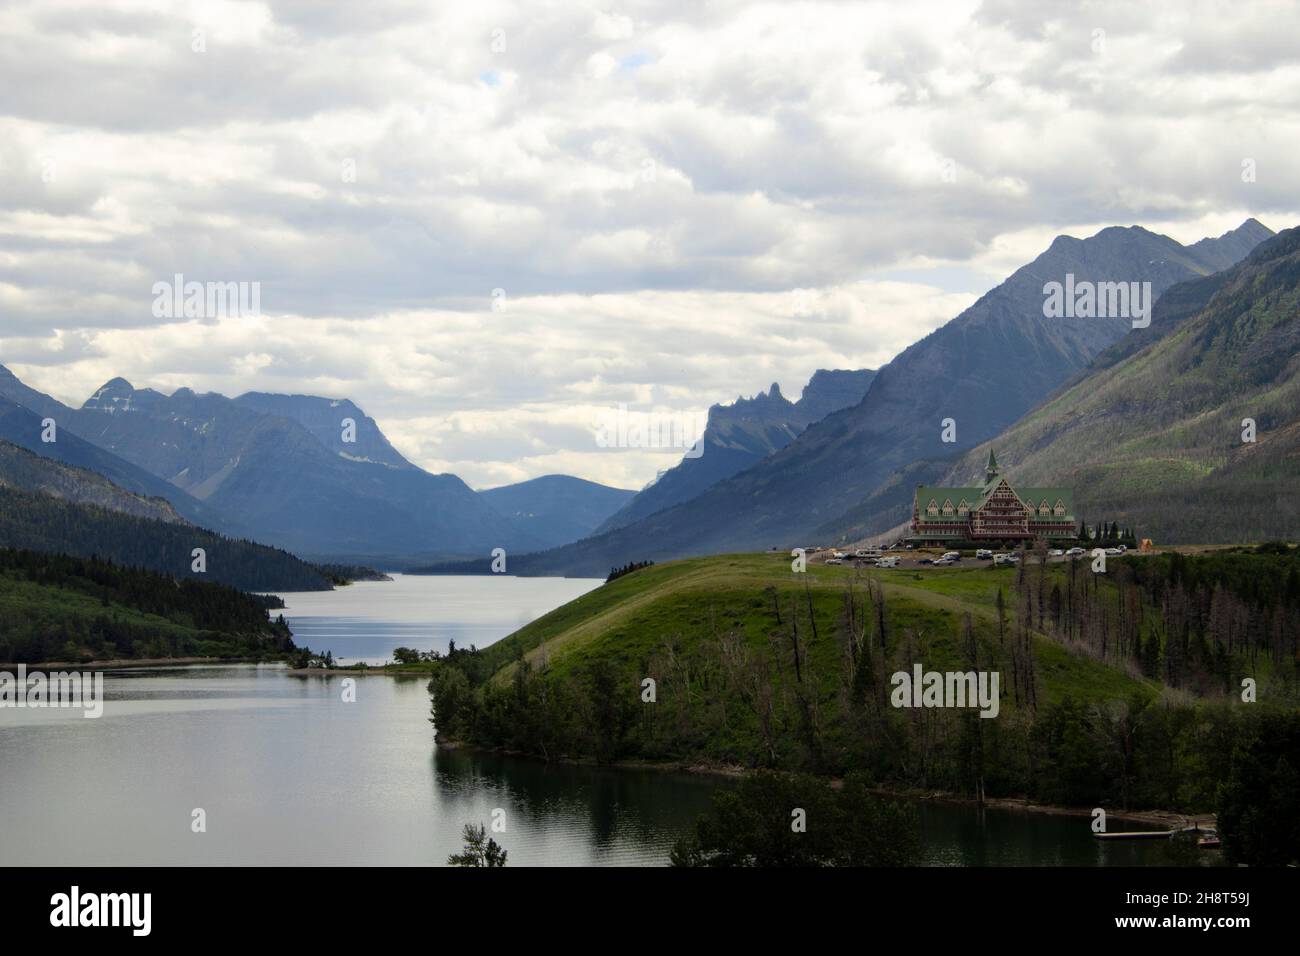 Prince of Wales Hotel along side Waterton Lake with green hills and mountains in background. very cloudy overcast sky Stock Photo